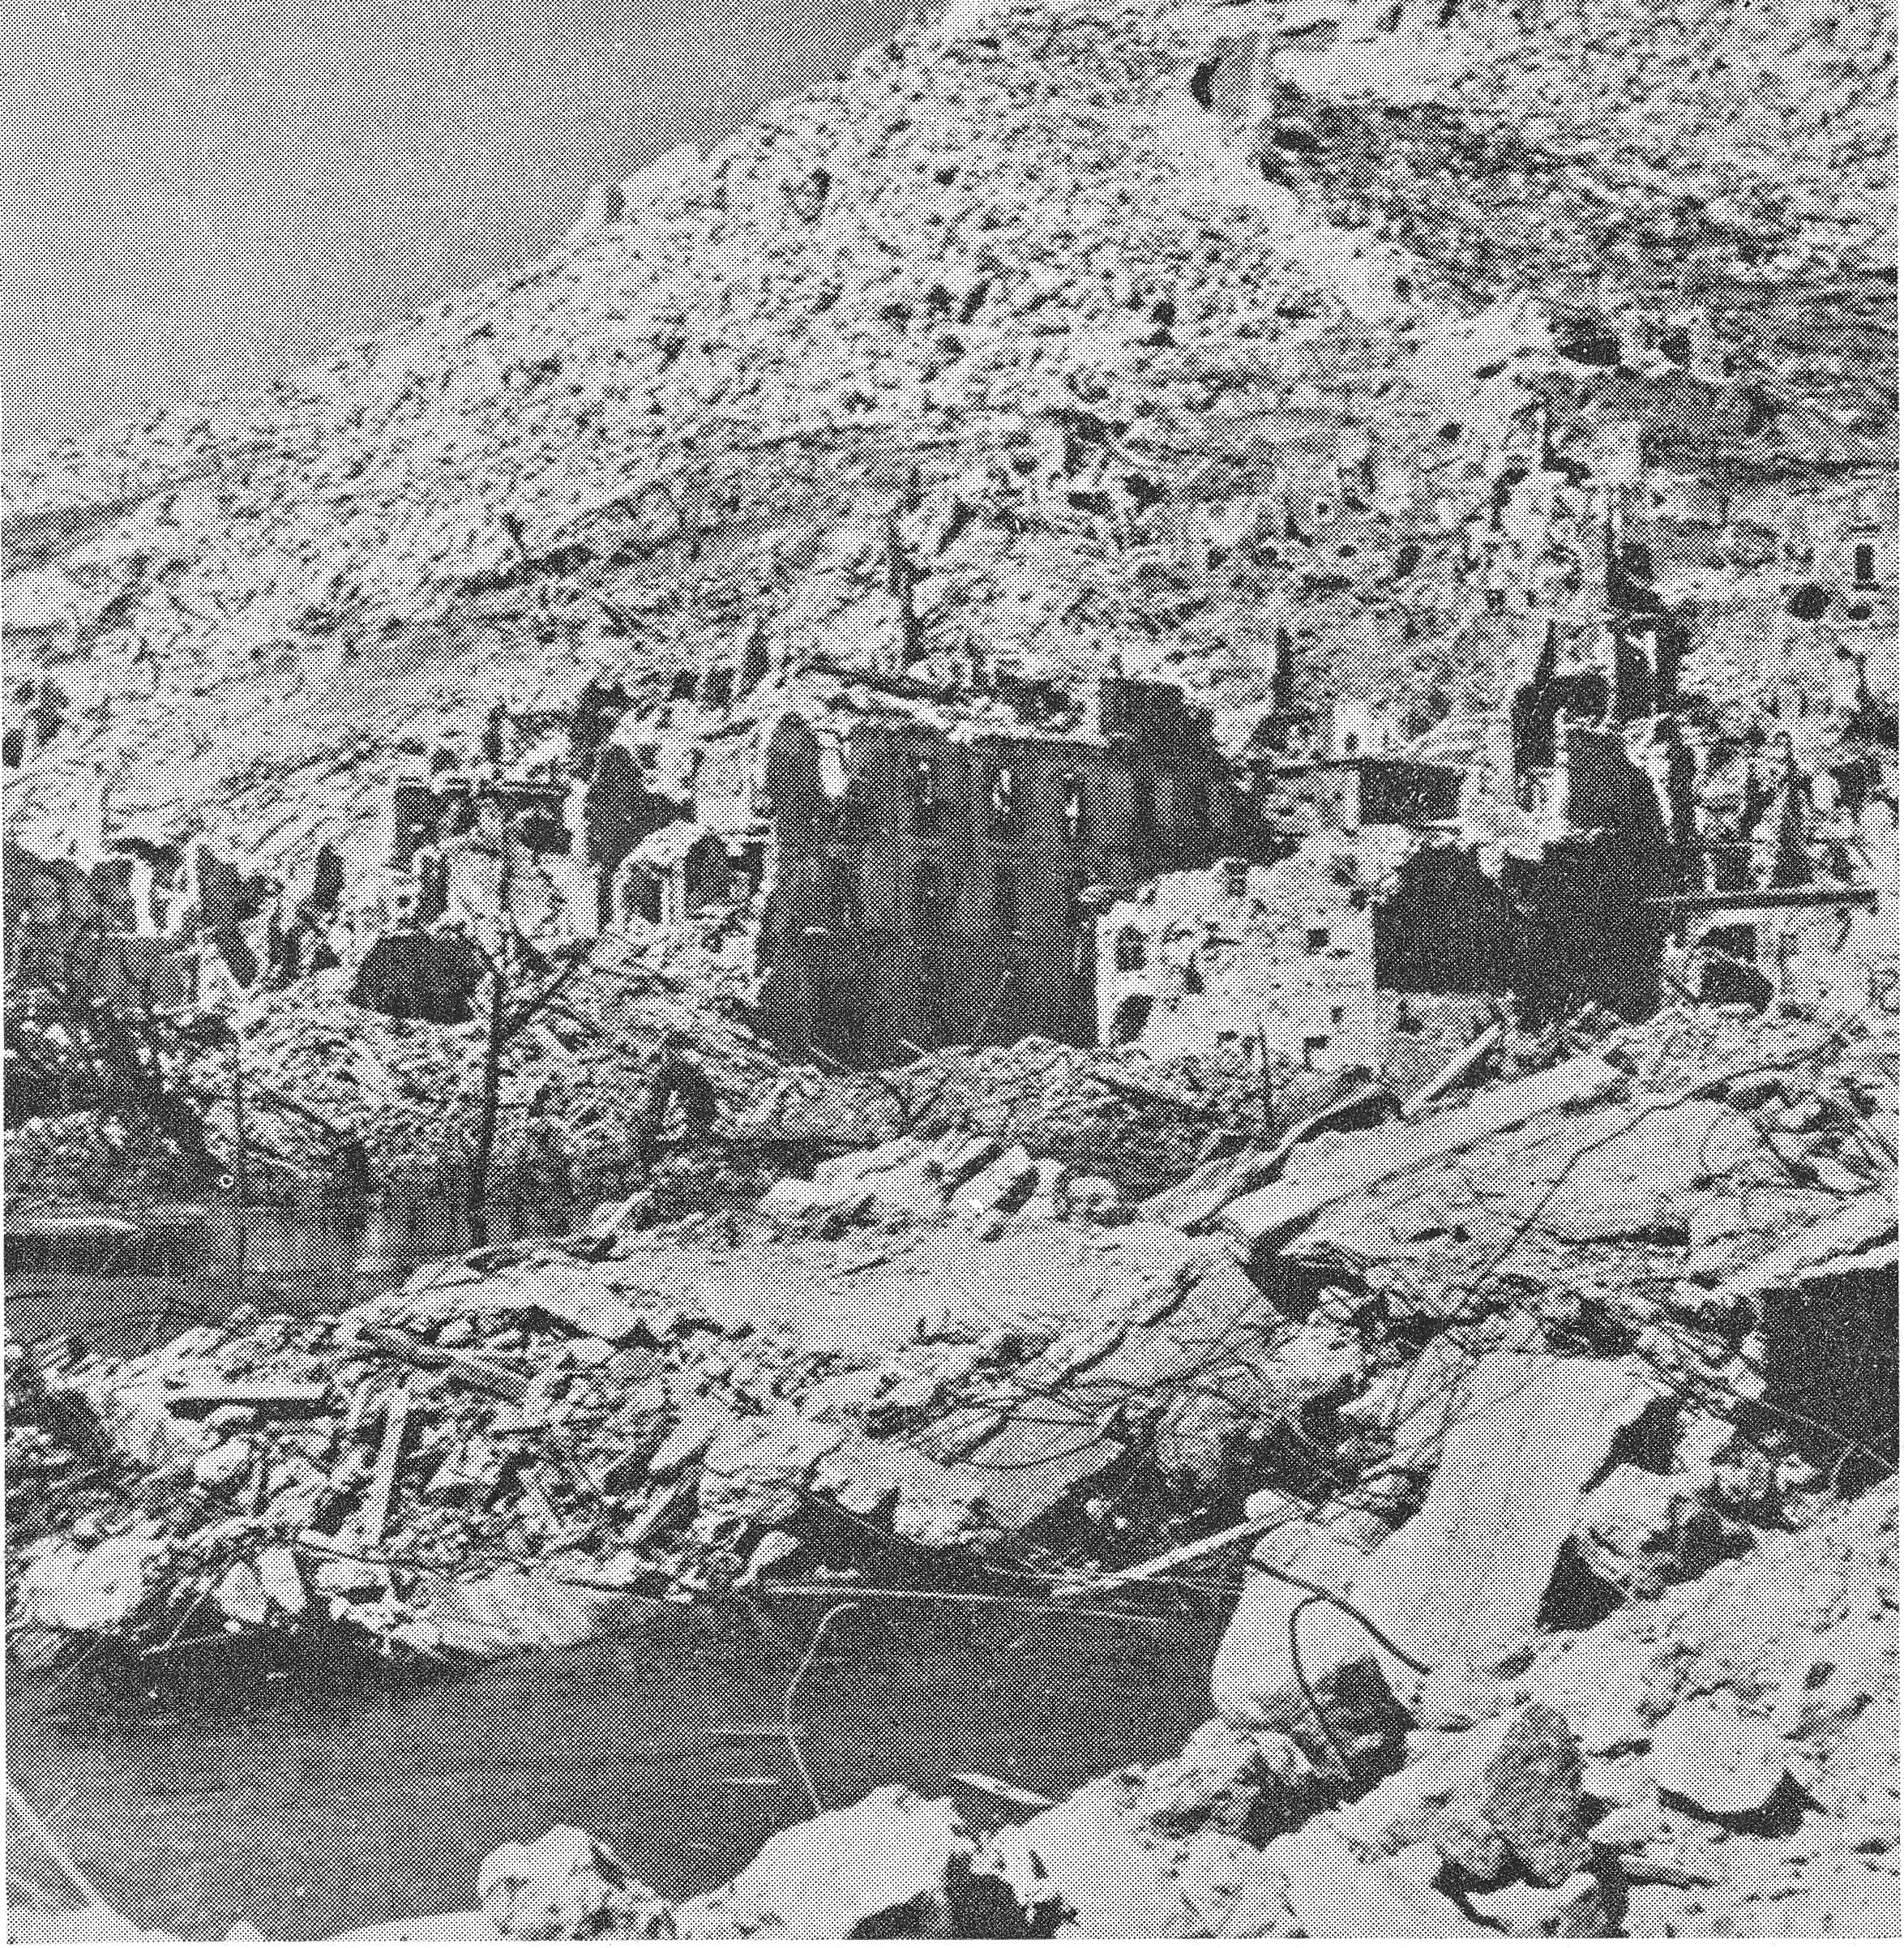 Close-up of some of the ruins of Cassino, Italy